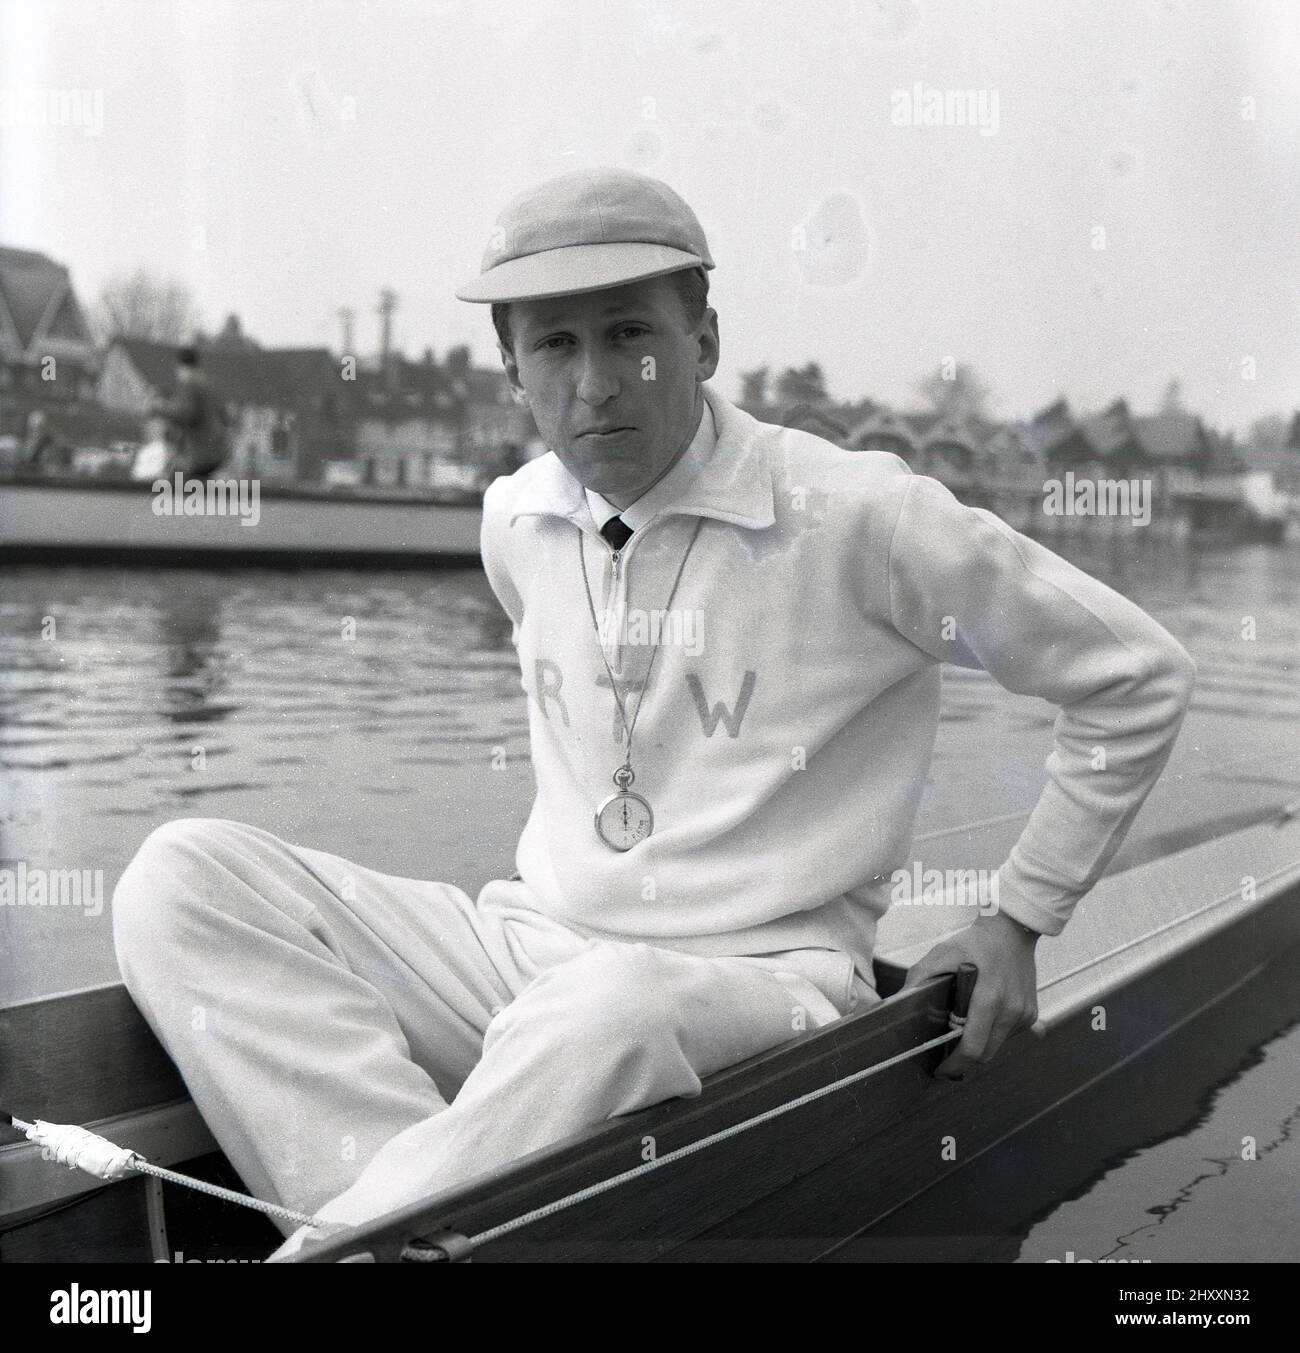 1961, historical, sitting in a rowing boat on the water, the coxswain or cox of the Cambridge University Boat team, R. T. Weston of Selwyn college, with cap and stopwatch. The initals RTW are embrodied on his cotton tracksuit top. Roger Weston had been the Cambridge cox the previous year. The Oxford & Cambridge Boat Race, the famous university rowing race, first took place 1829 and is an annaul event on the River Thames over the championship course between Putney and Barnes in South West London. Stock Photo